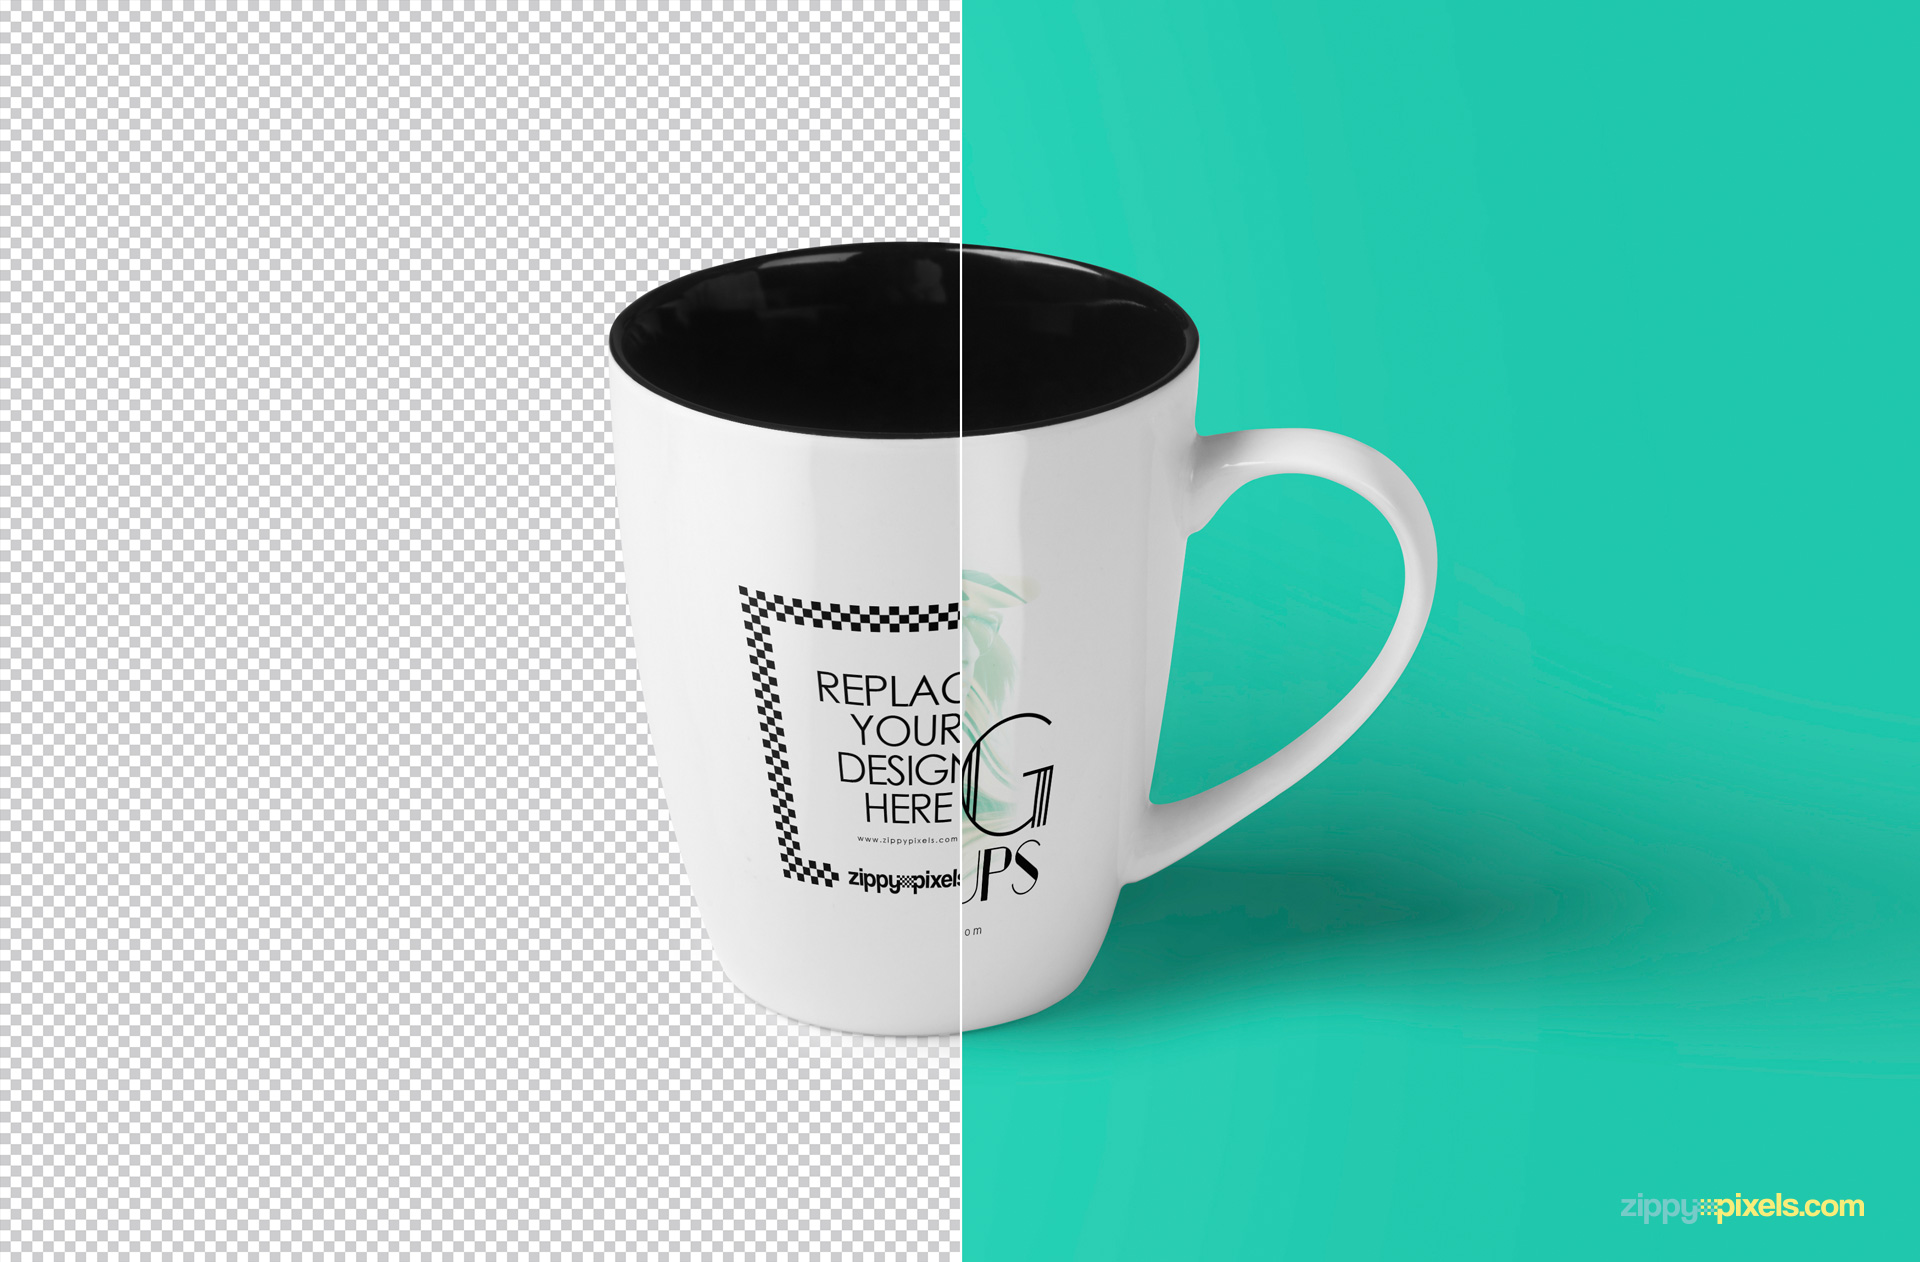 free PSD cup mockup with smart object based design replacement